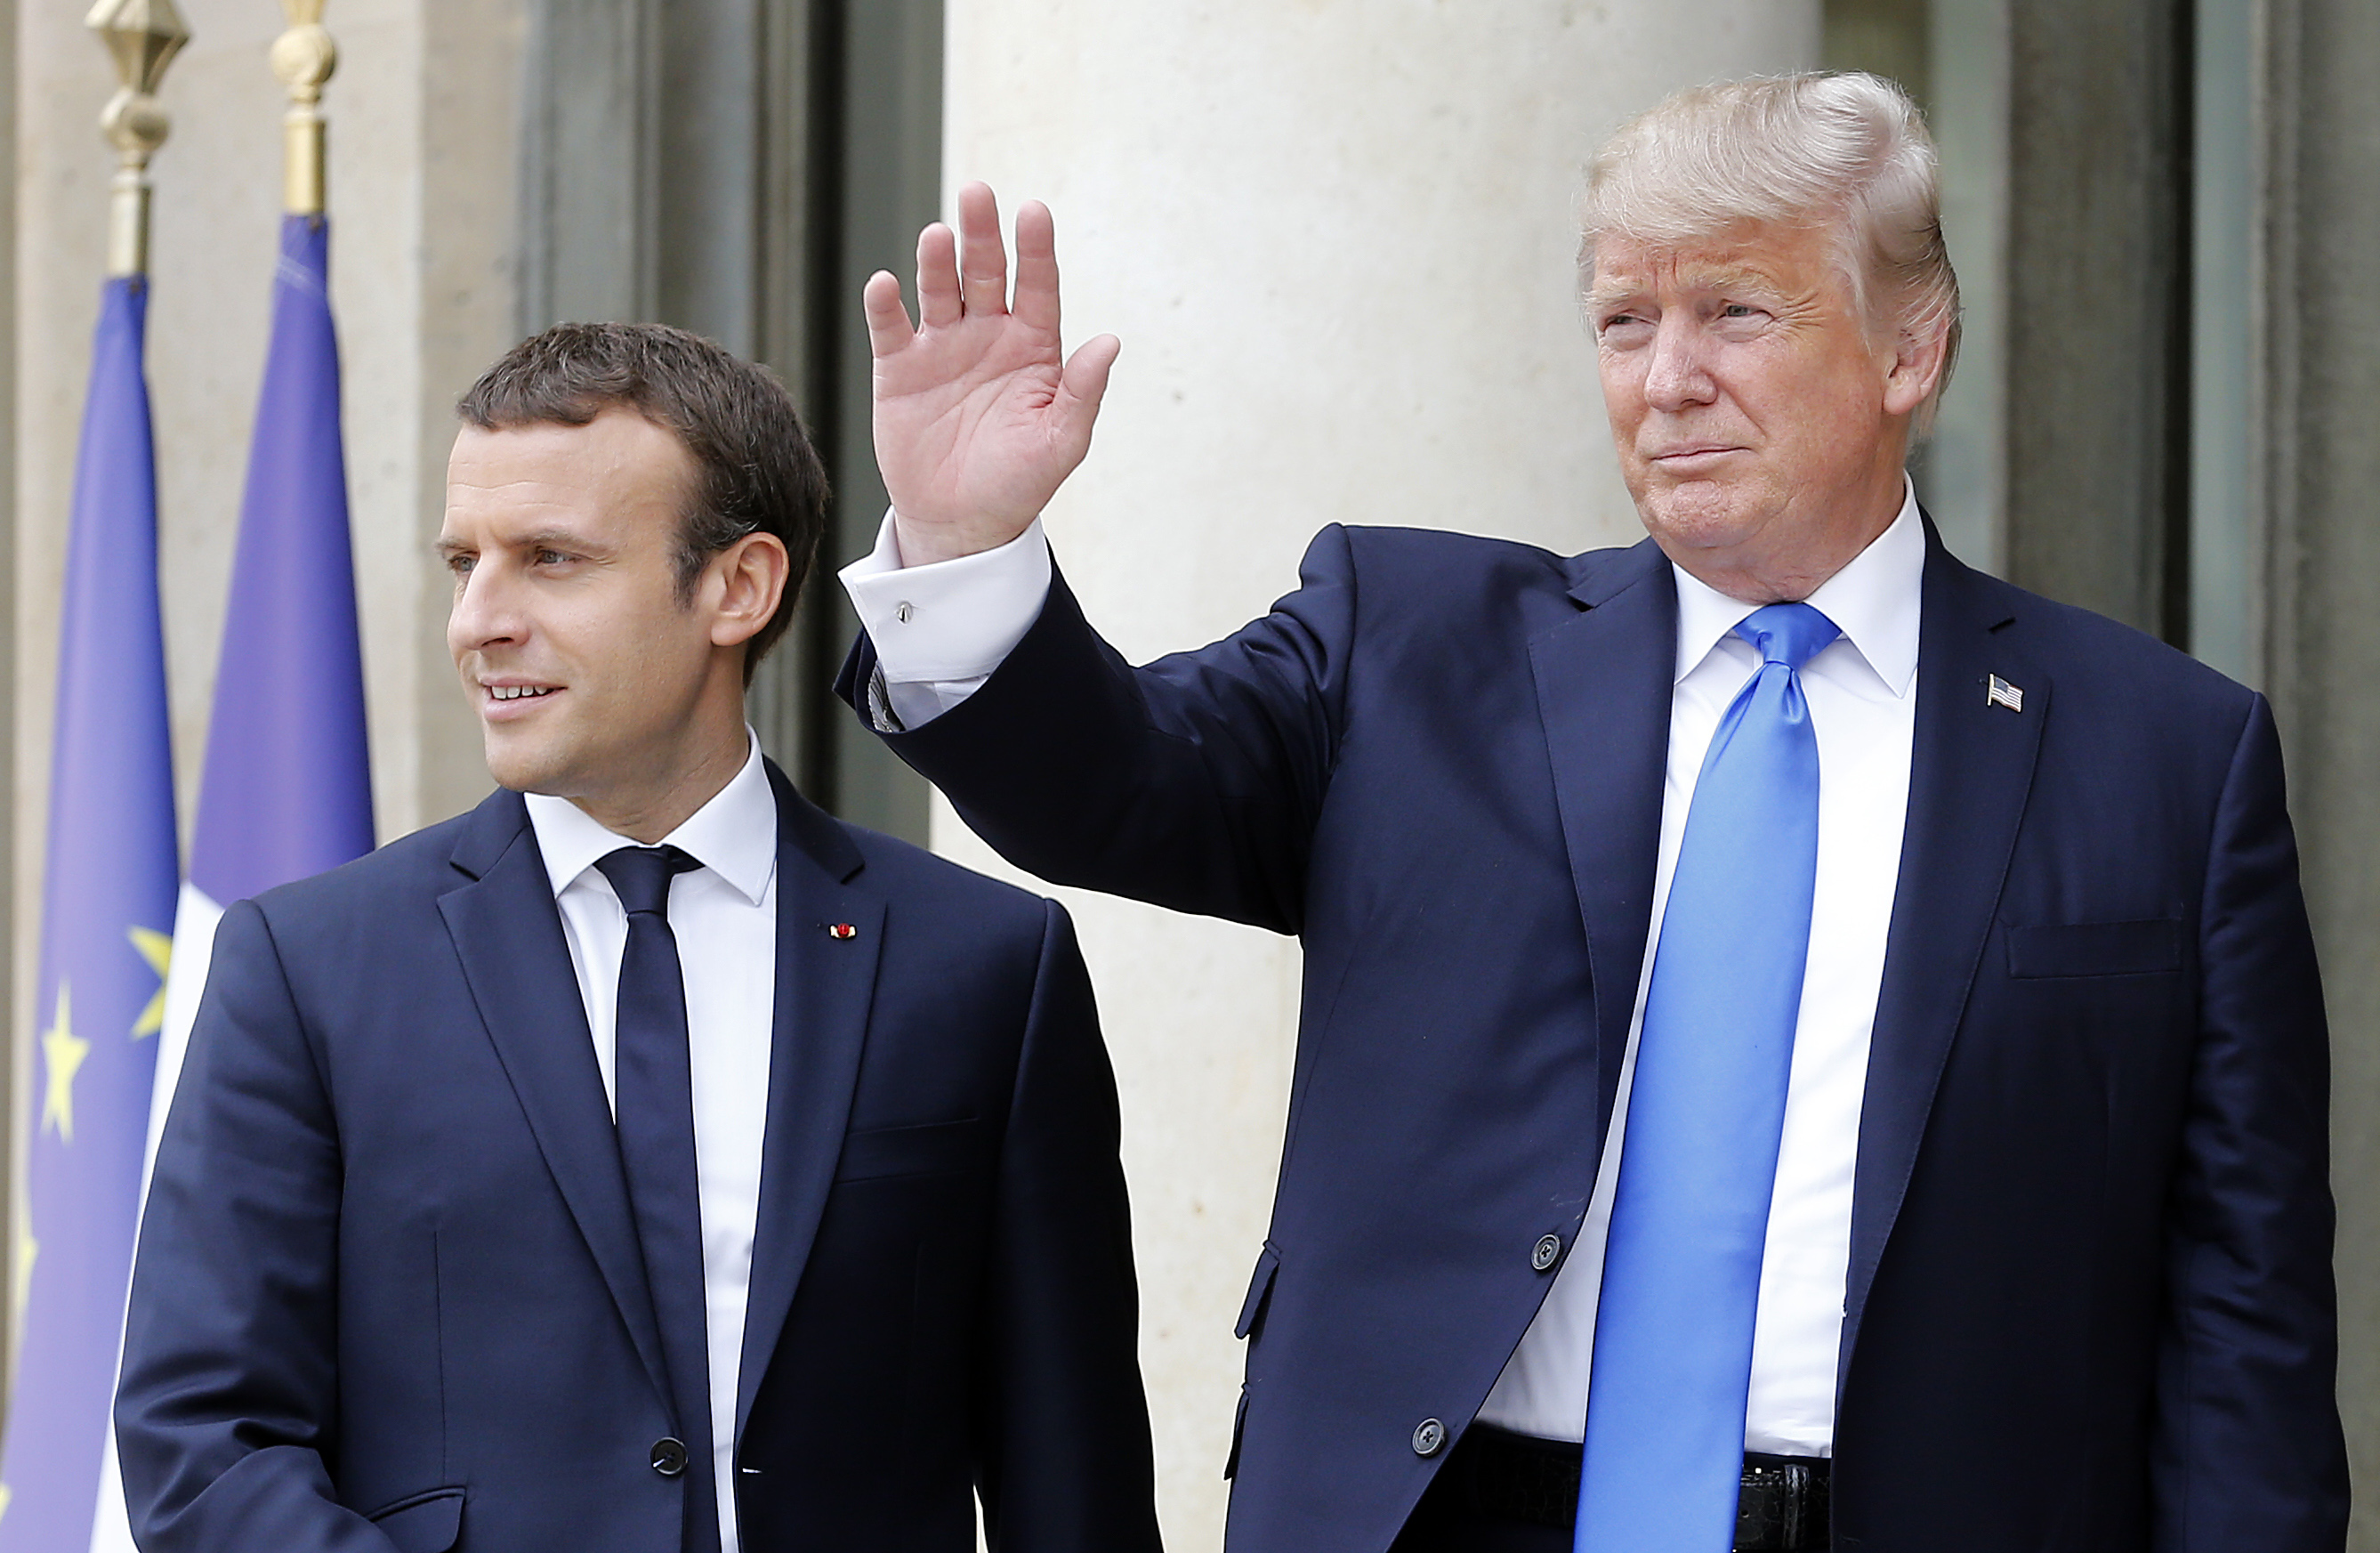 French President Emmanuel Macron welcomes US President Donald Trump prior to a meeting at the Elysee Presidential Palace on July 13, 2017 in Paris, France. (Thierry Chesnot—Getty Images)